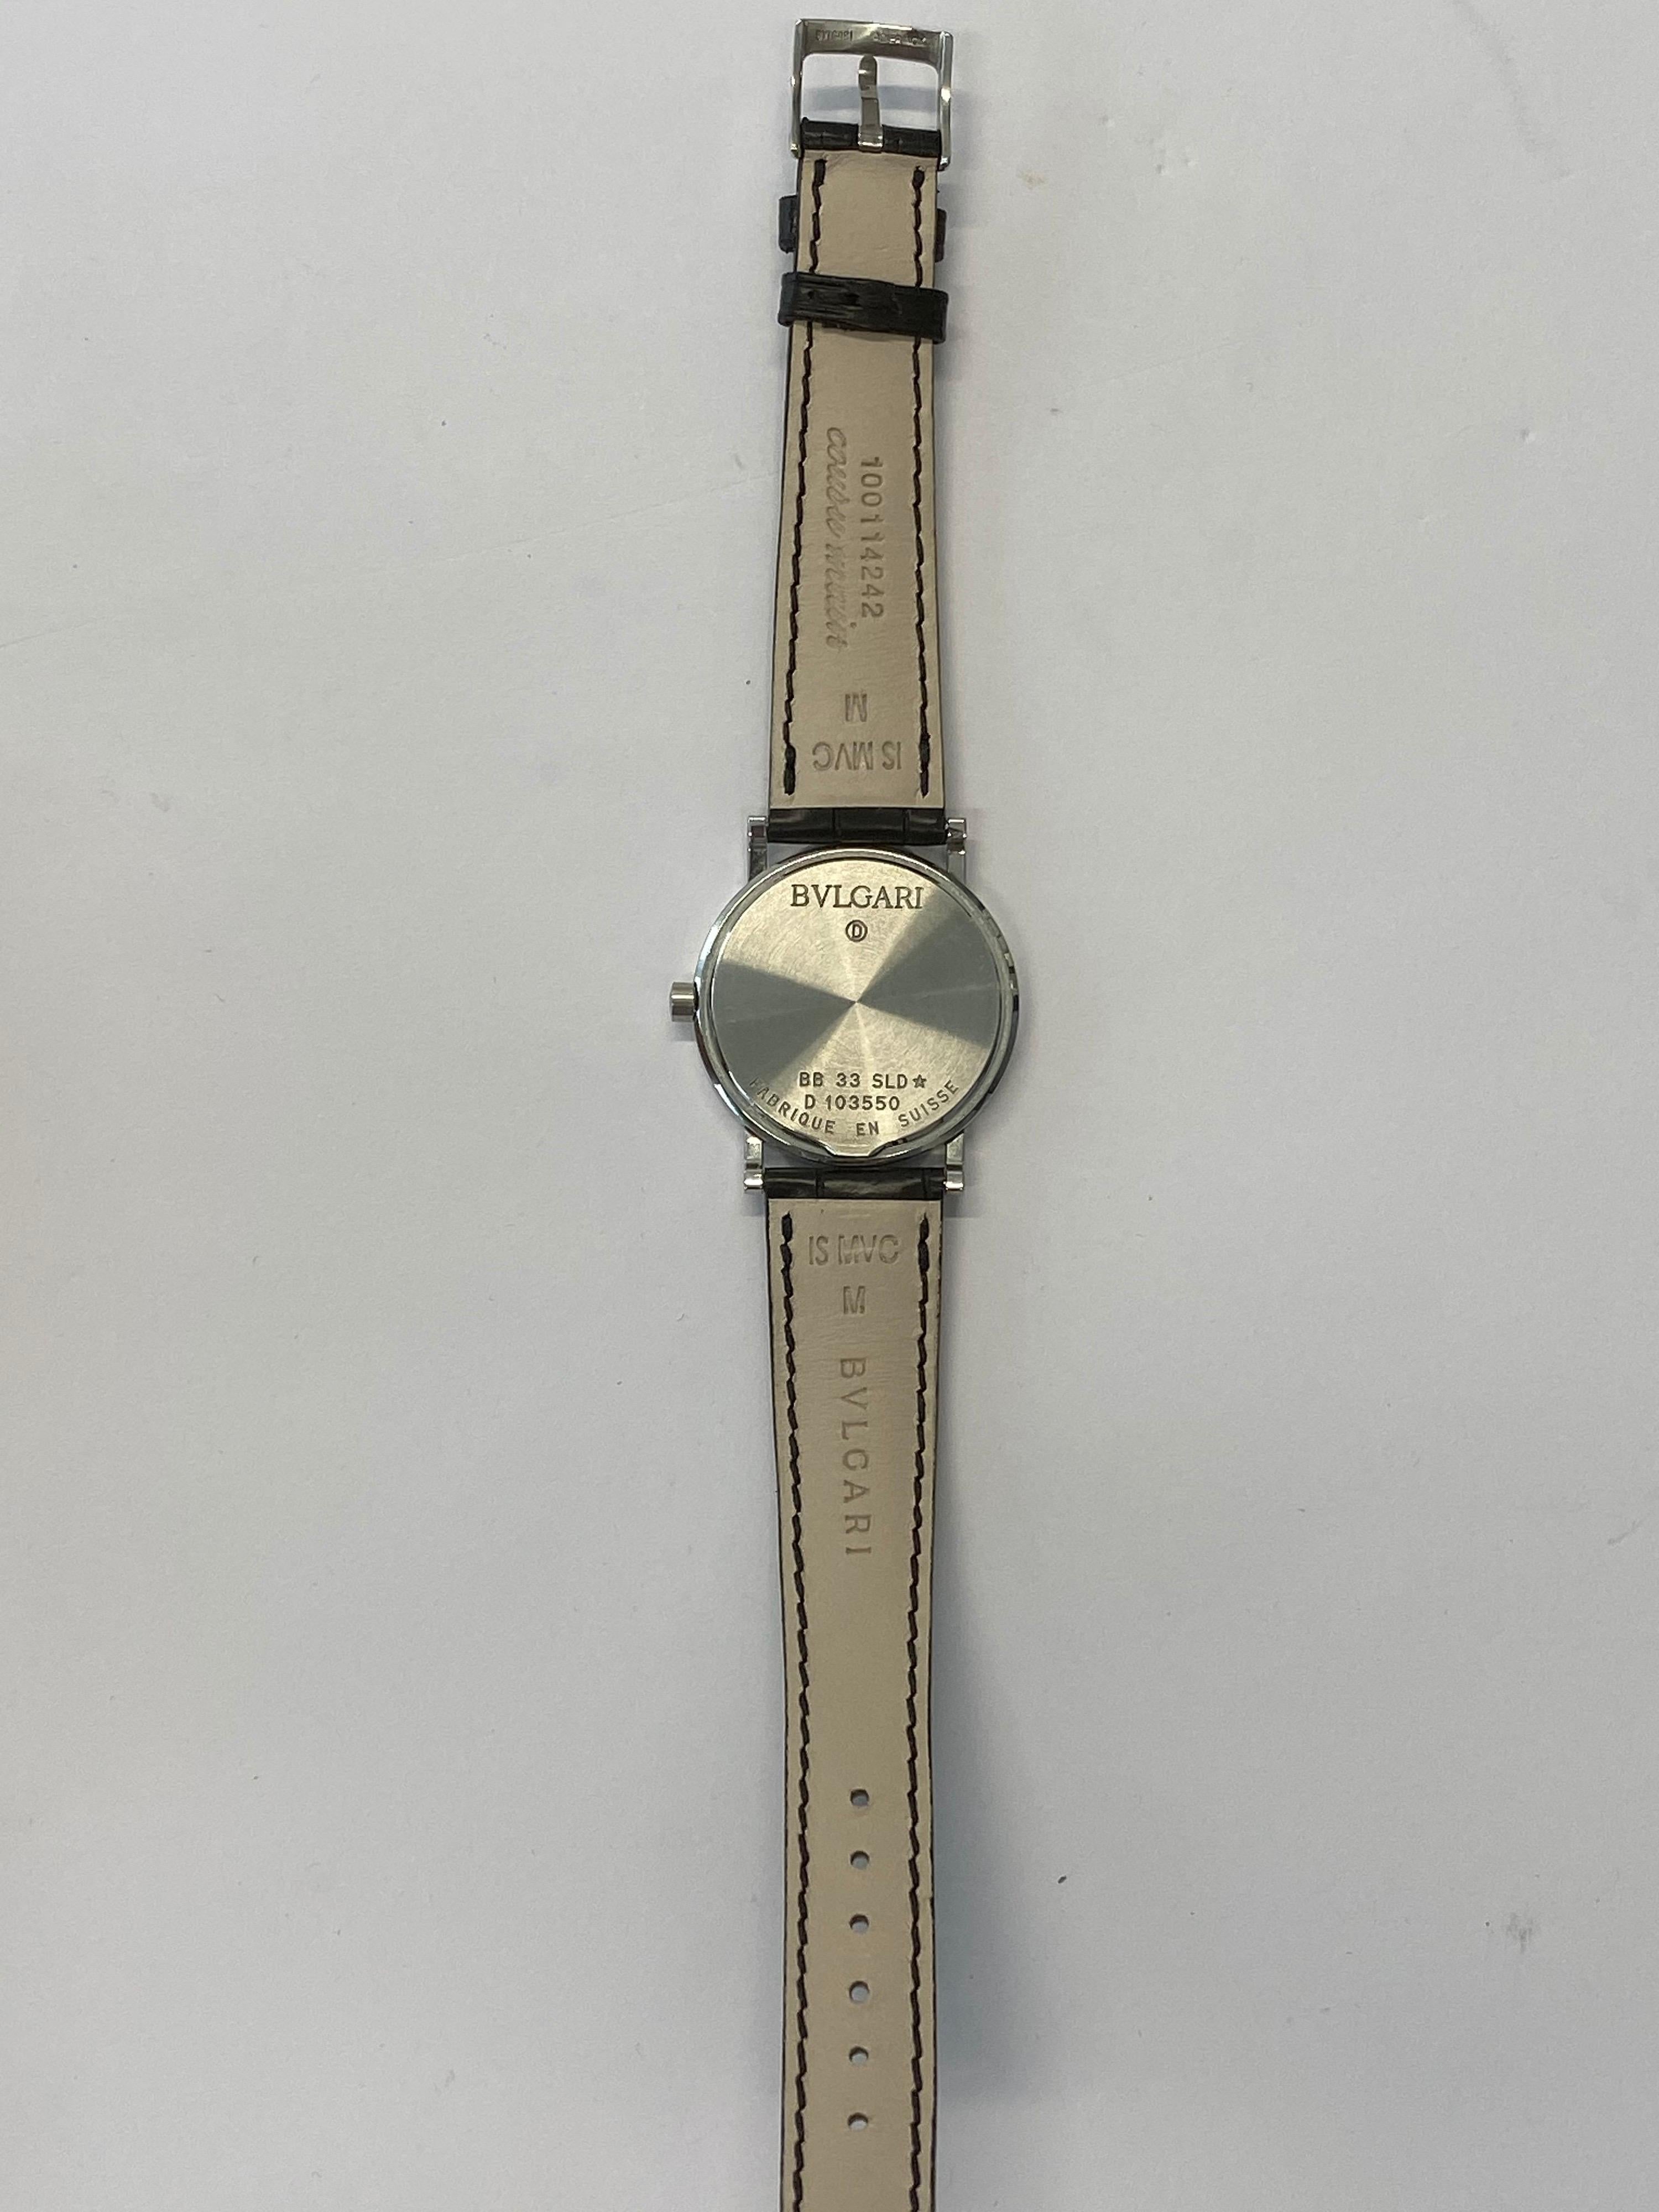 Bvlgari BB 33 SLD Stainless Steel Watch In Excellent Condition In New York, NY